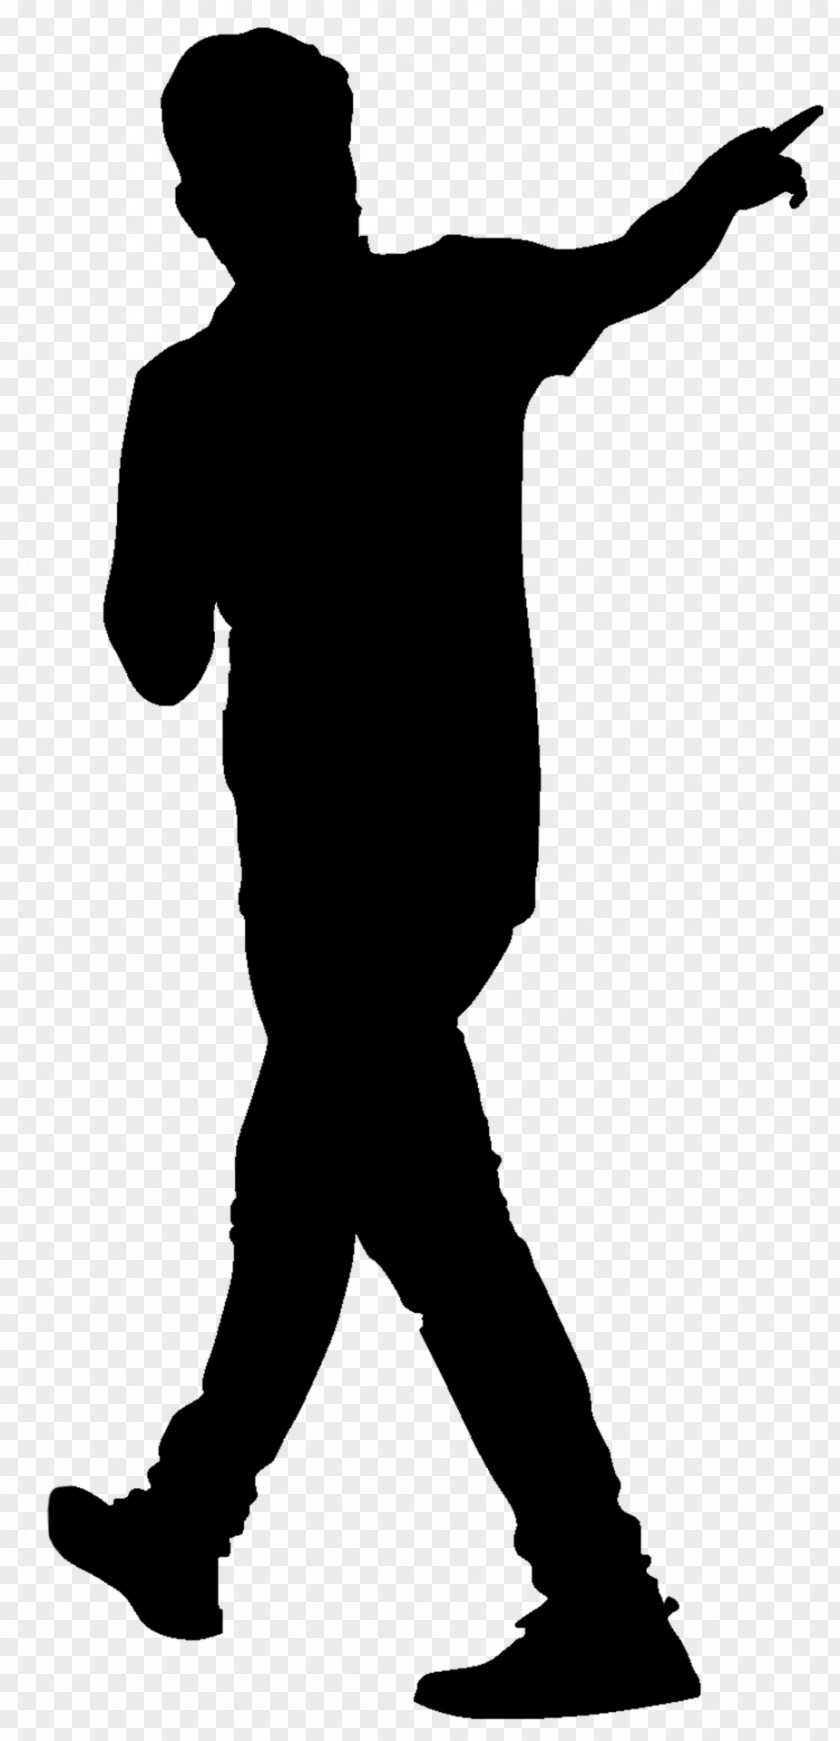 Silhouette Soldier Illustration Vector Graphics Clip Art PNG